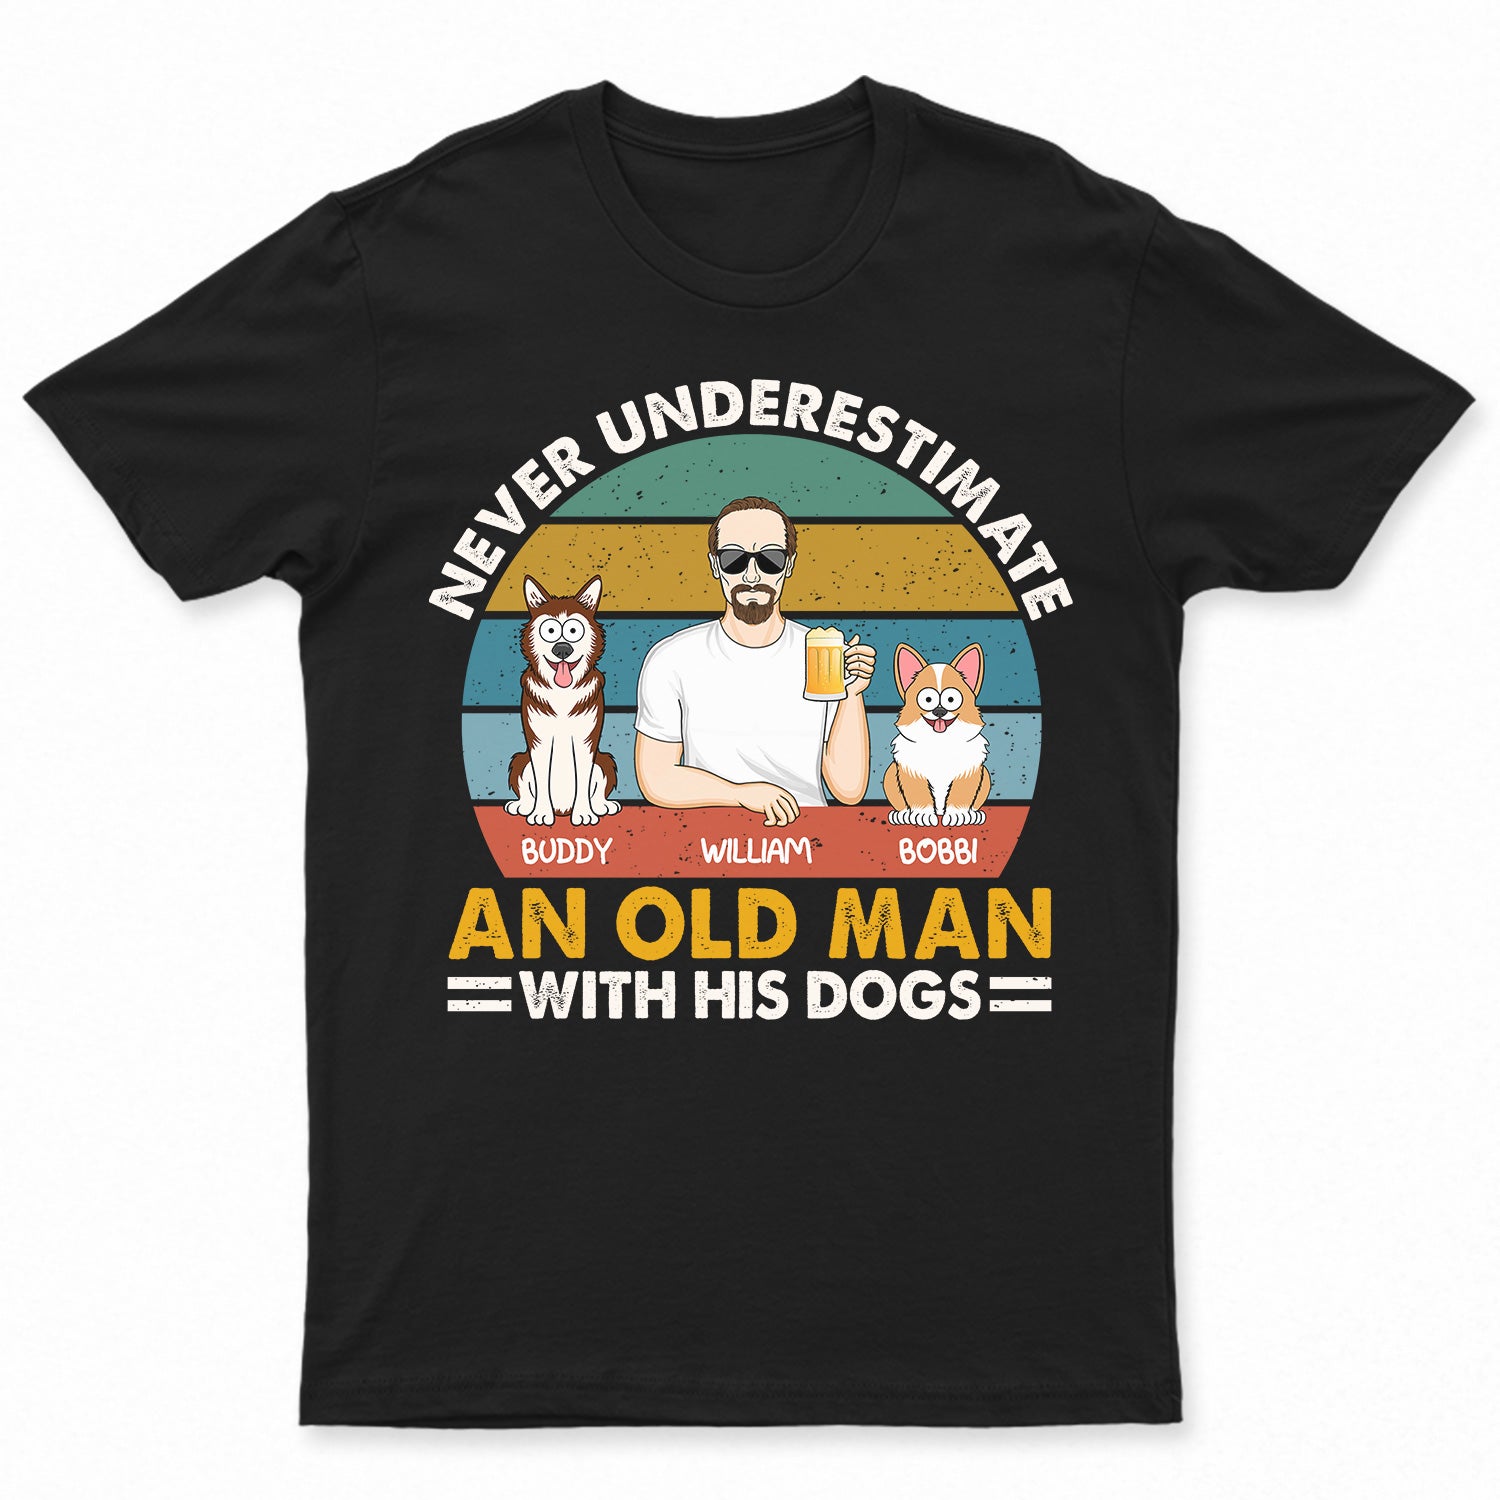 Never Underestimate An Old Man With His Dog - Birthday, Anniversary, Funny Gift For Father, Dog Dad, Dog Lovers - Personalized T Shirt